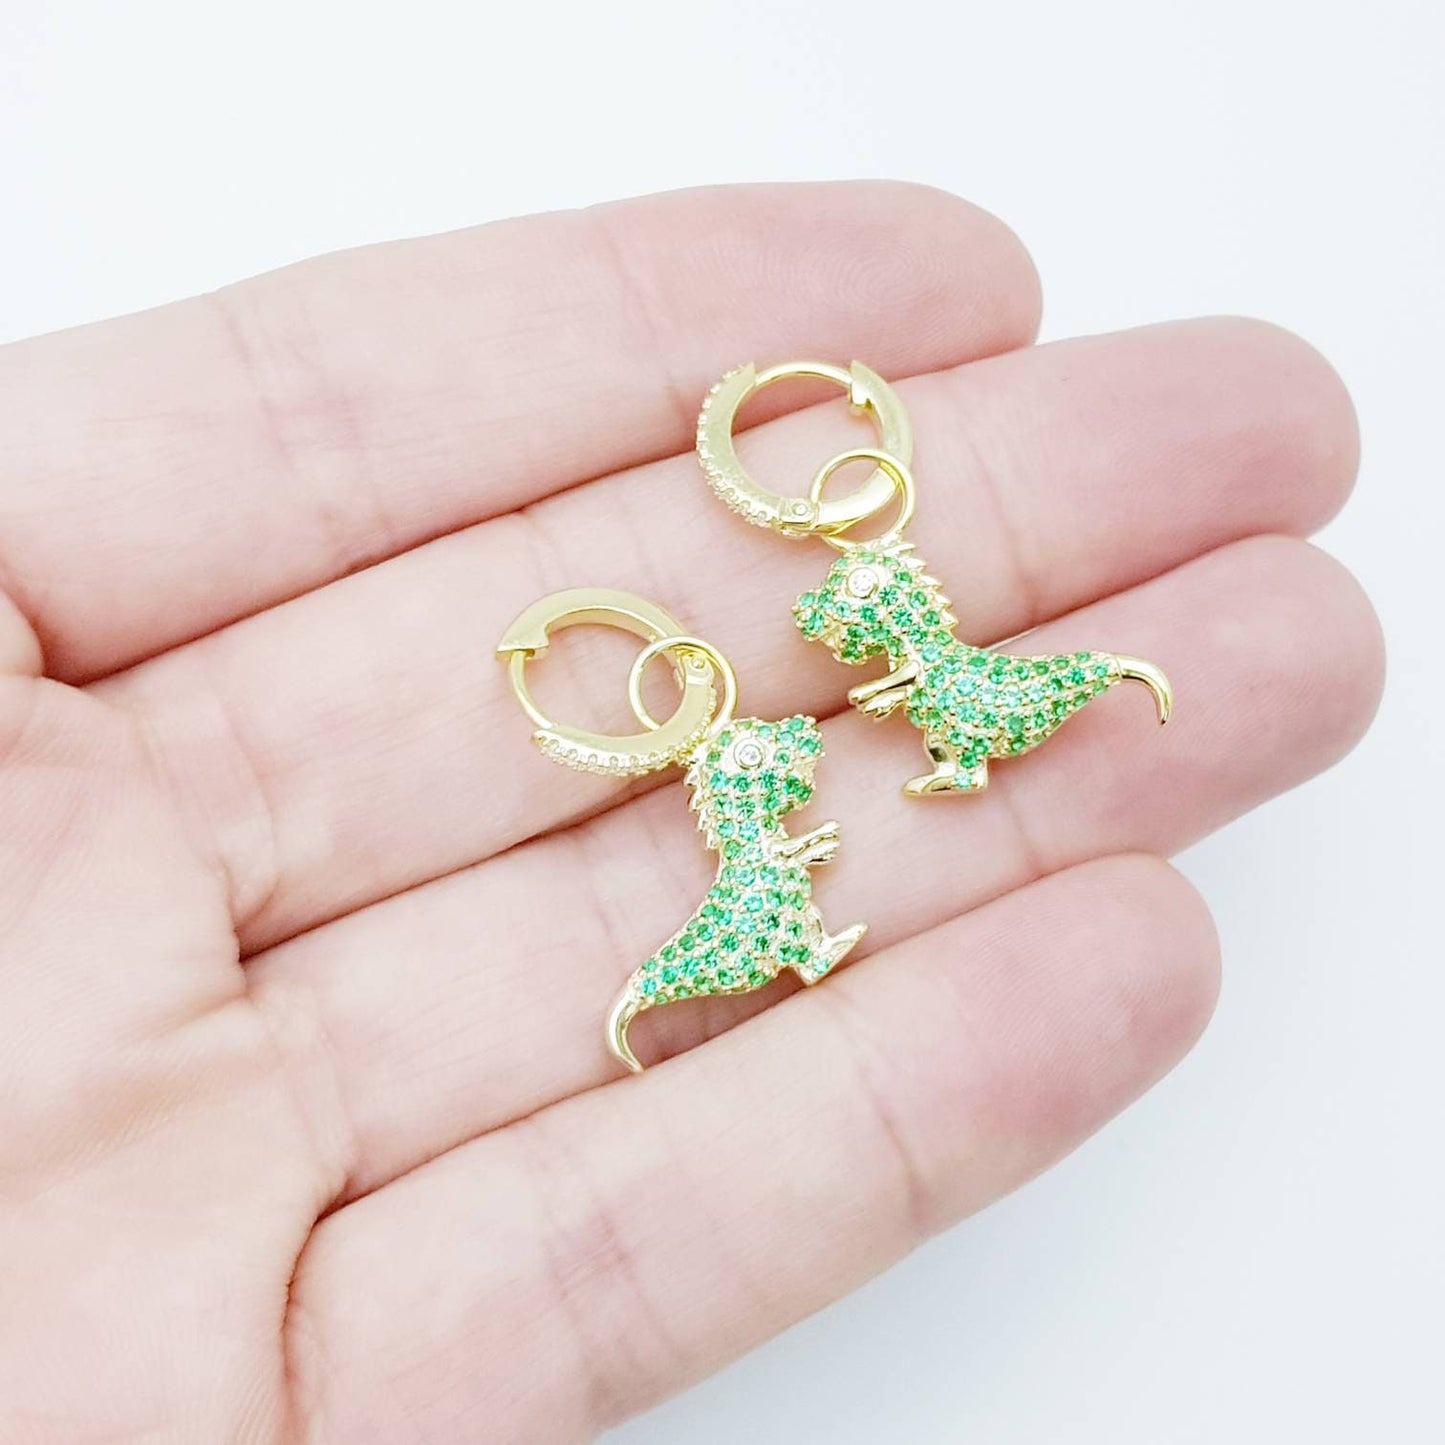 Godzilla gold hoops with removable charm, cute drop earrings, two earrings in one